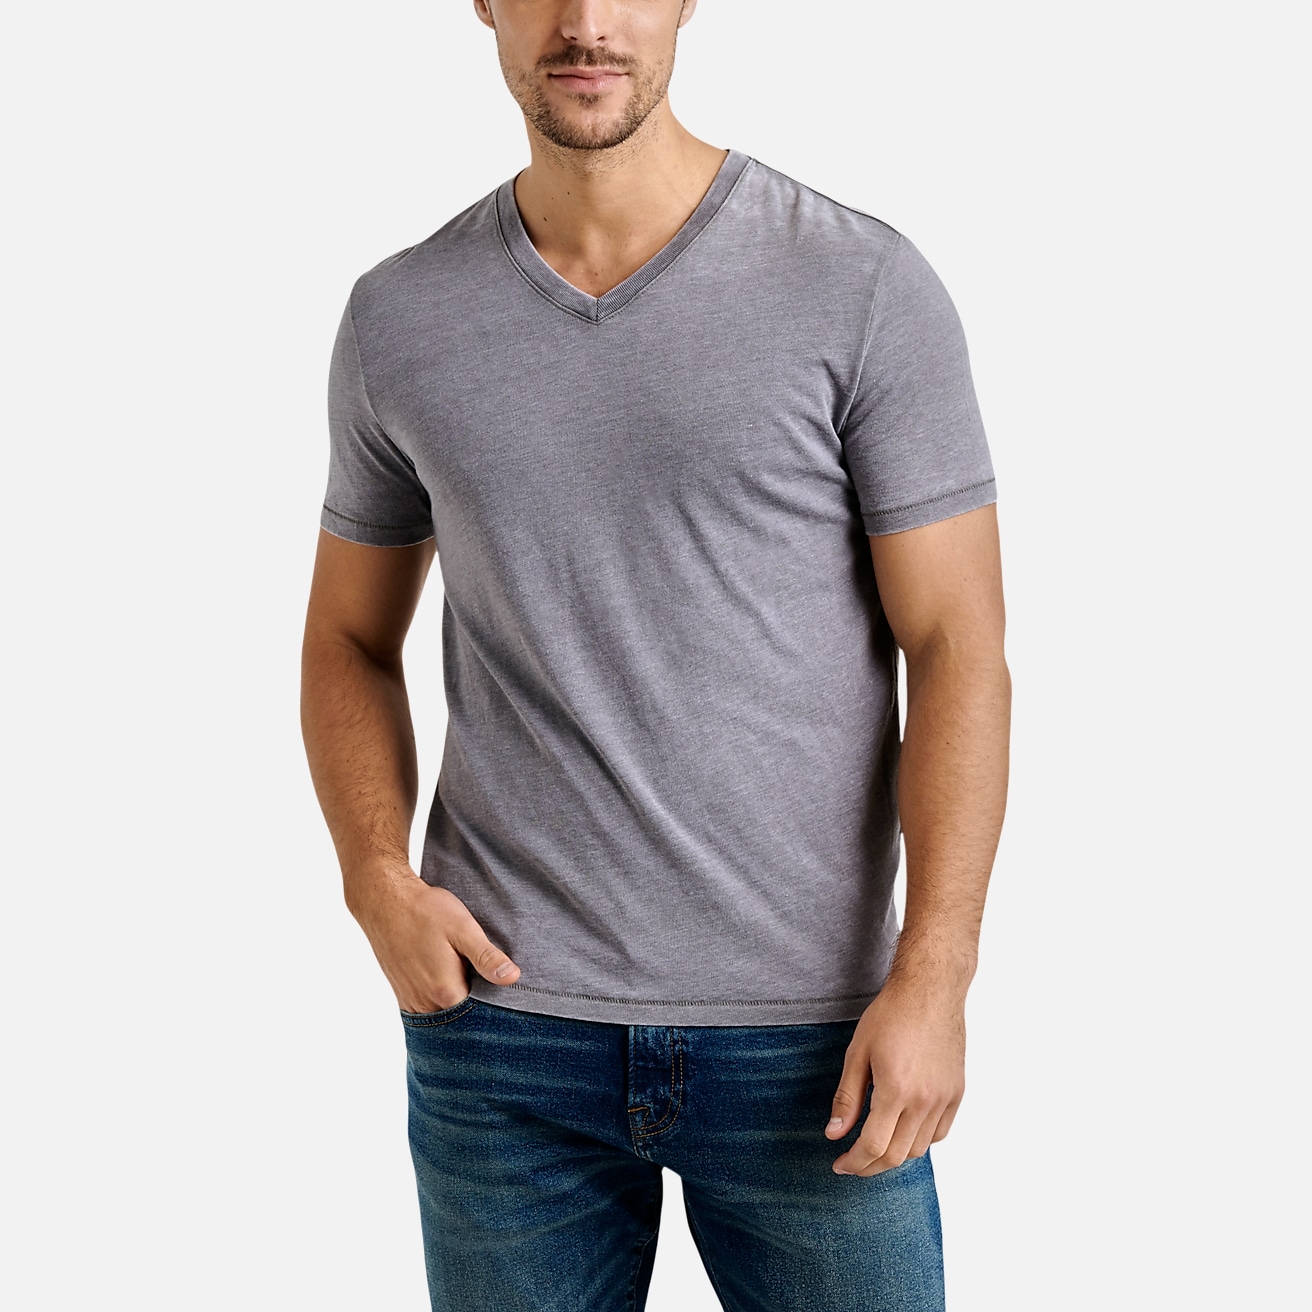 https://image.menswearhouse.com/is/image/TMW/TMW_6GXA_04_LUCKY_BRAND_T_SHIRTS_GREY_MAIN?imPolicy=pdp-mob-2x